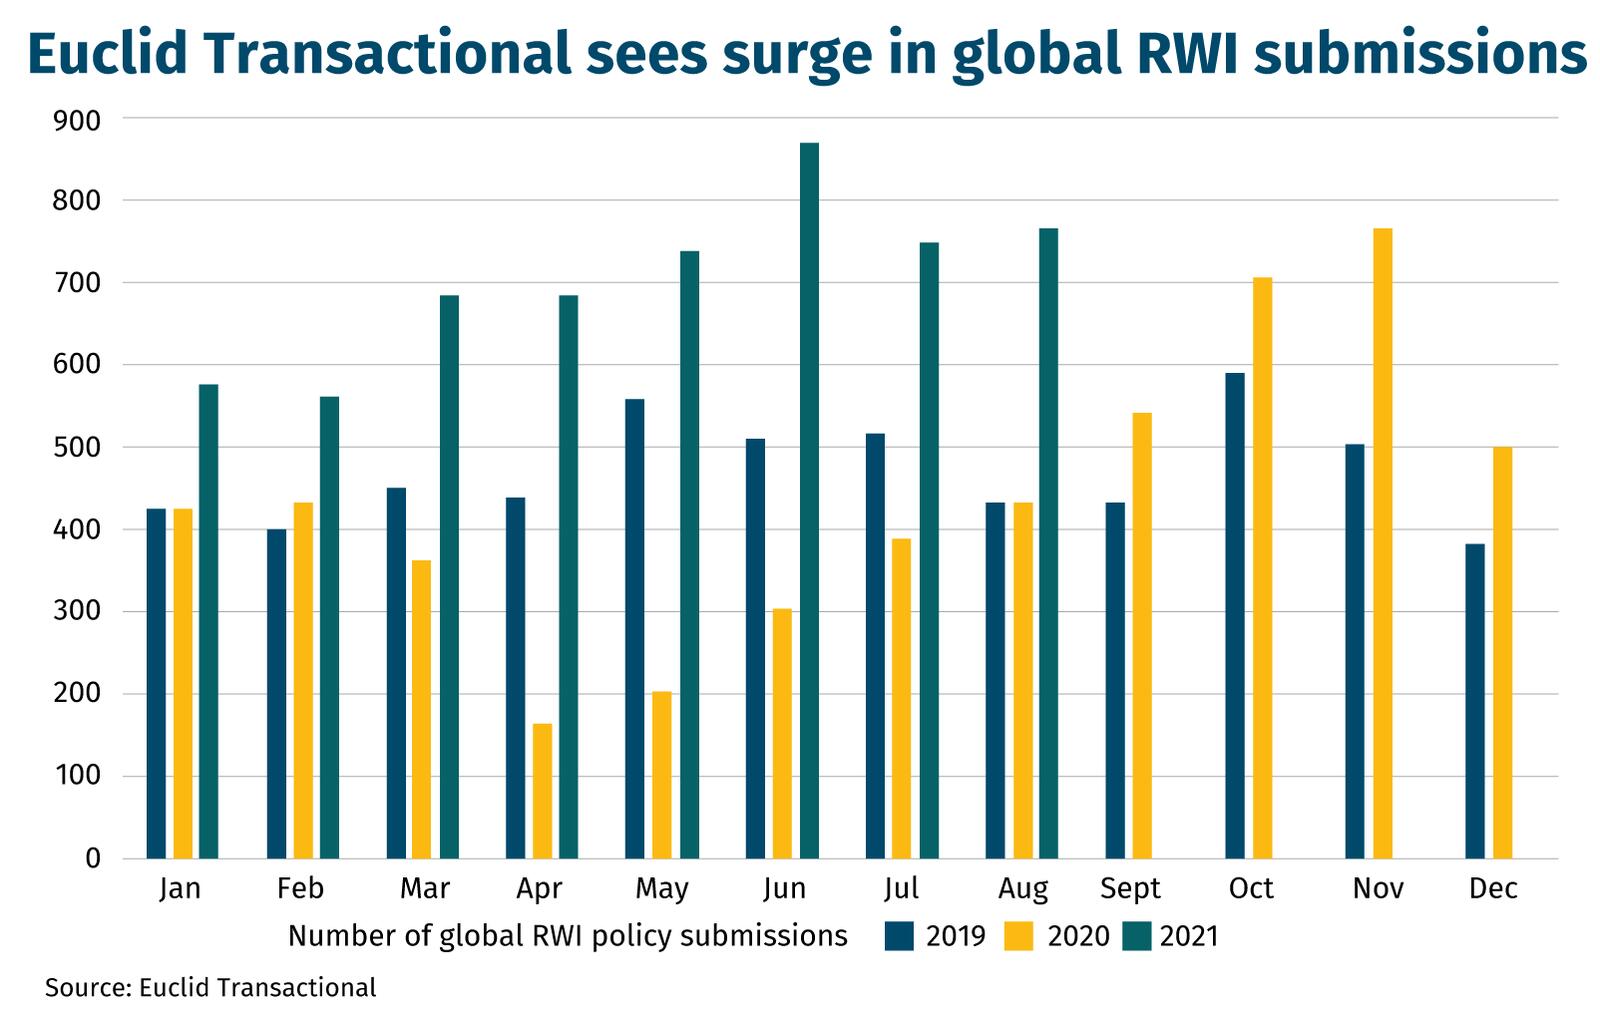 Euclid Transactional sees surge in global RWI submissions